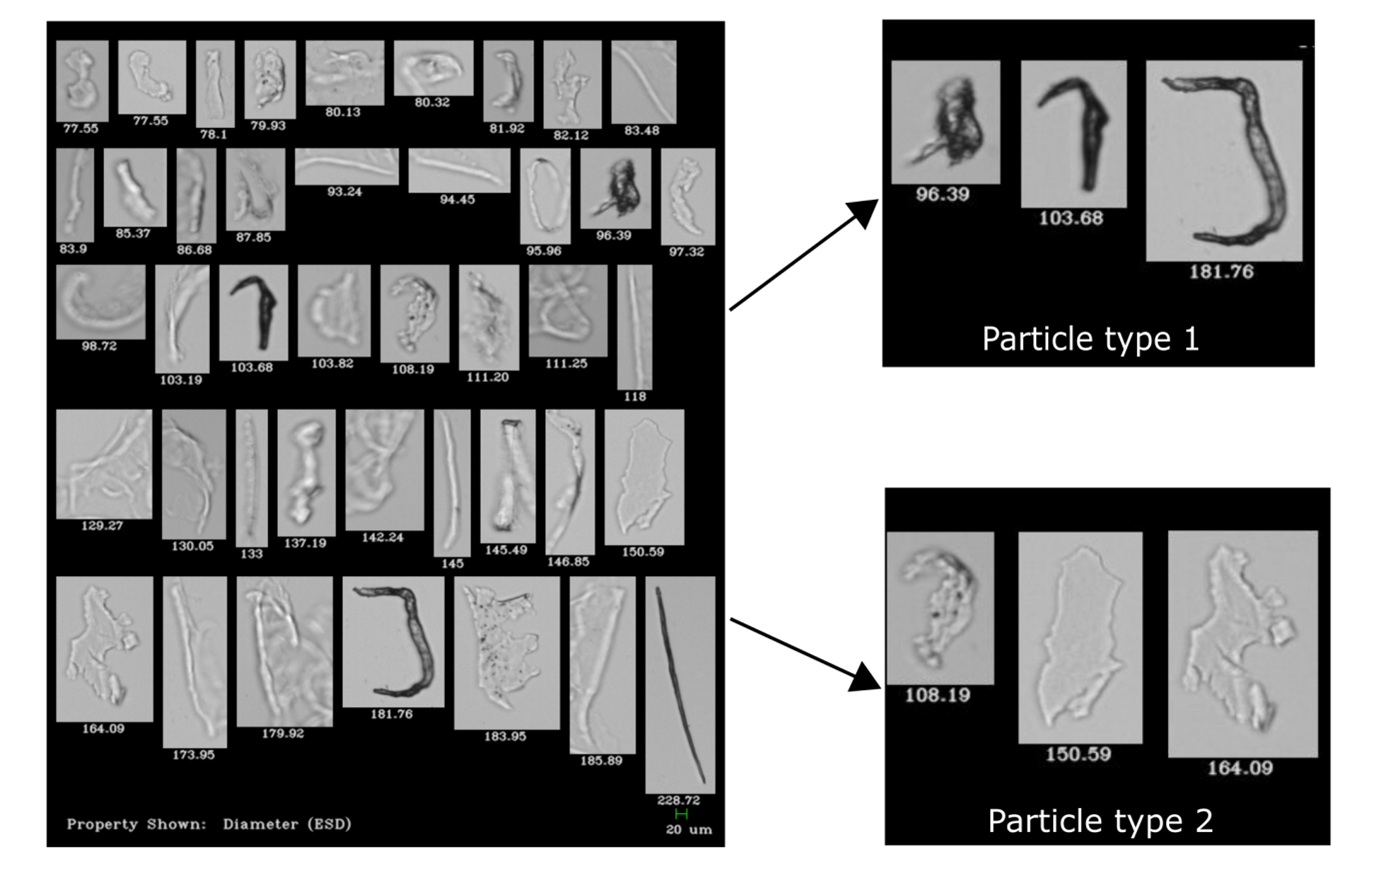 Kurzhals et al figure showing FlowCam images of highly transparent particles and contaminants